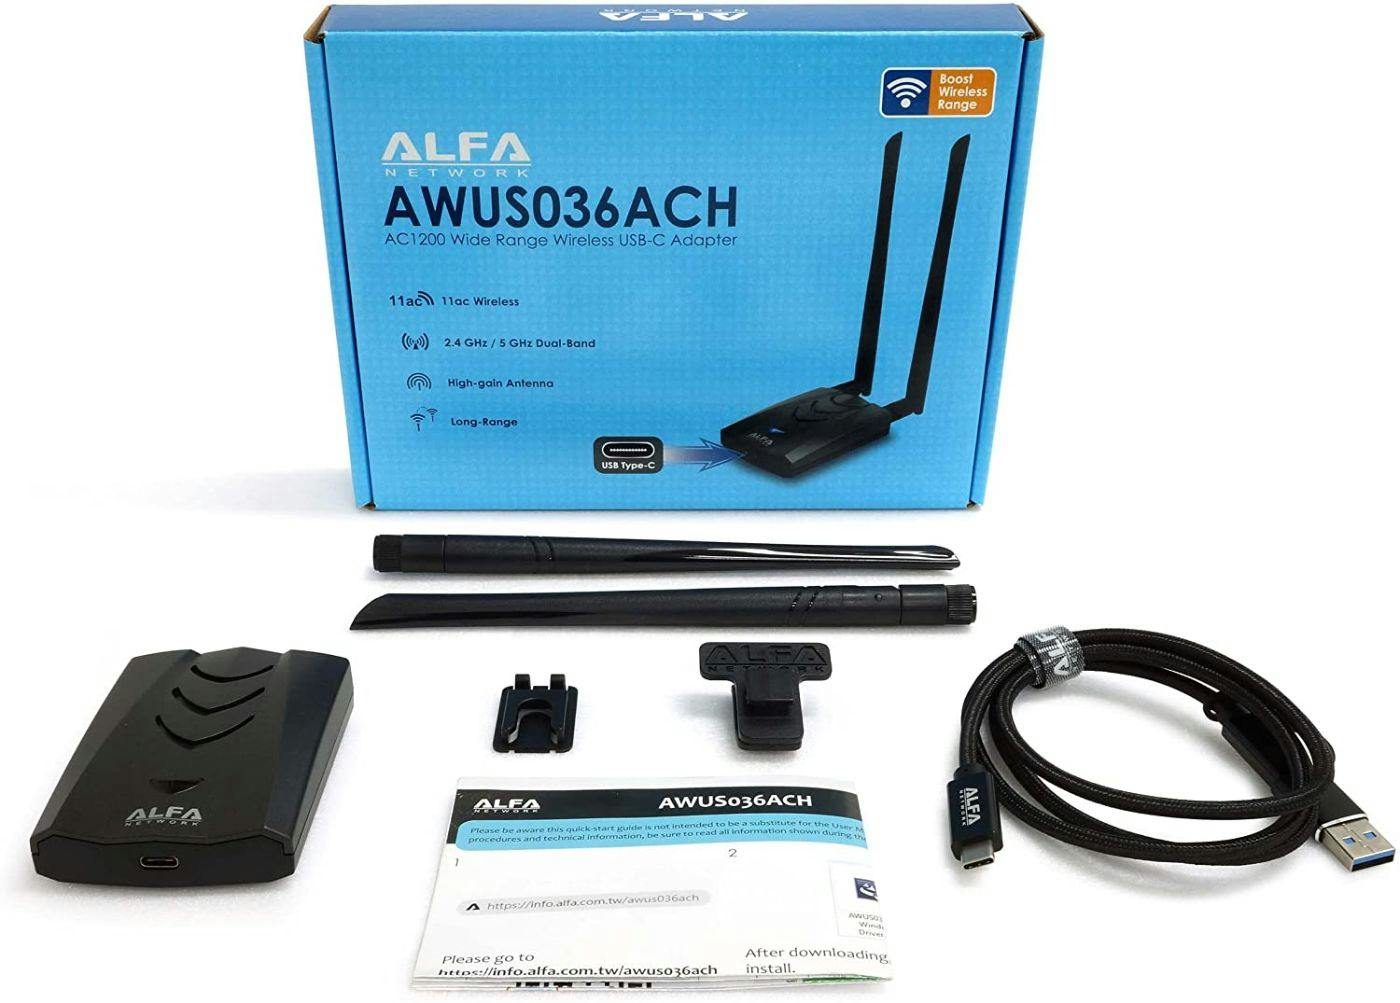 /configuring-the-alpha-awus036ach-wi-fi-adapter-on-kali-linux feature image